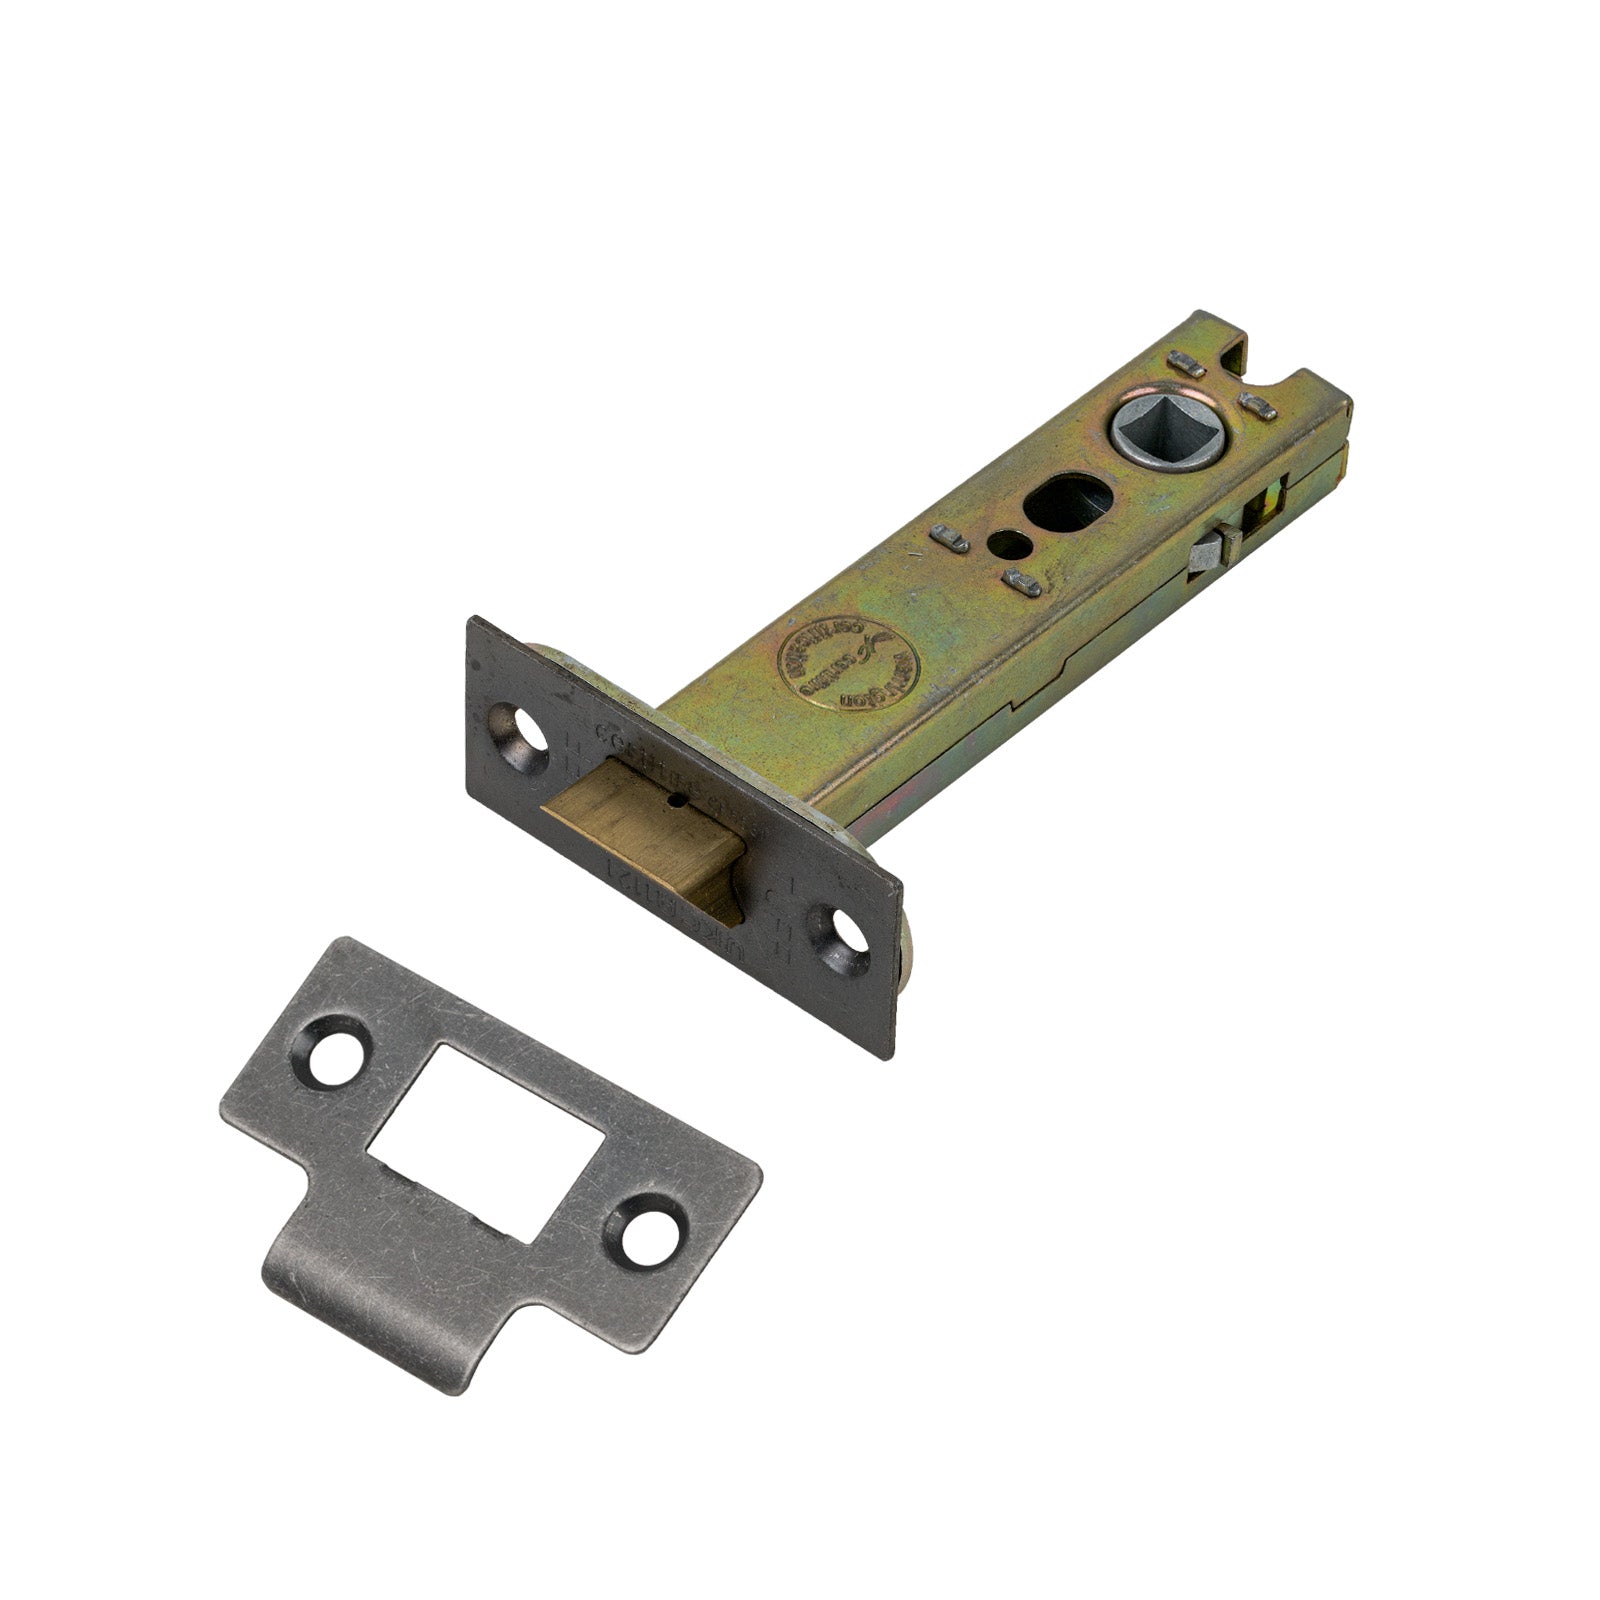 SHOW Heavy Duty Tubular Latch - 4 Inch with Distressed Silver finished forend and striker plate